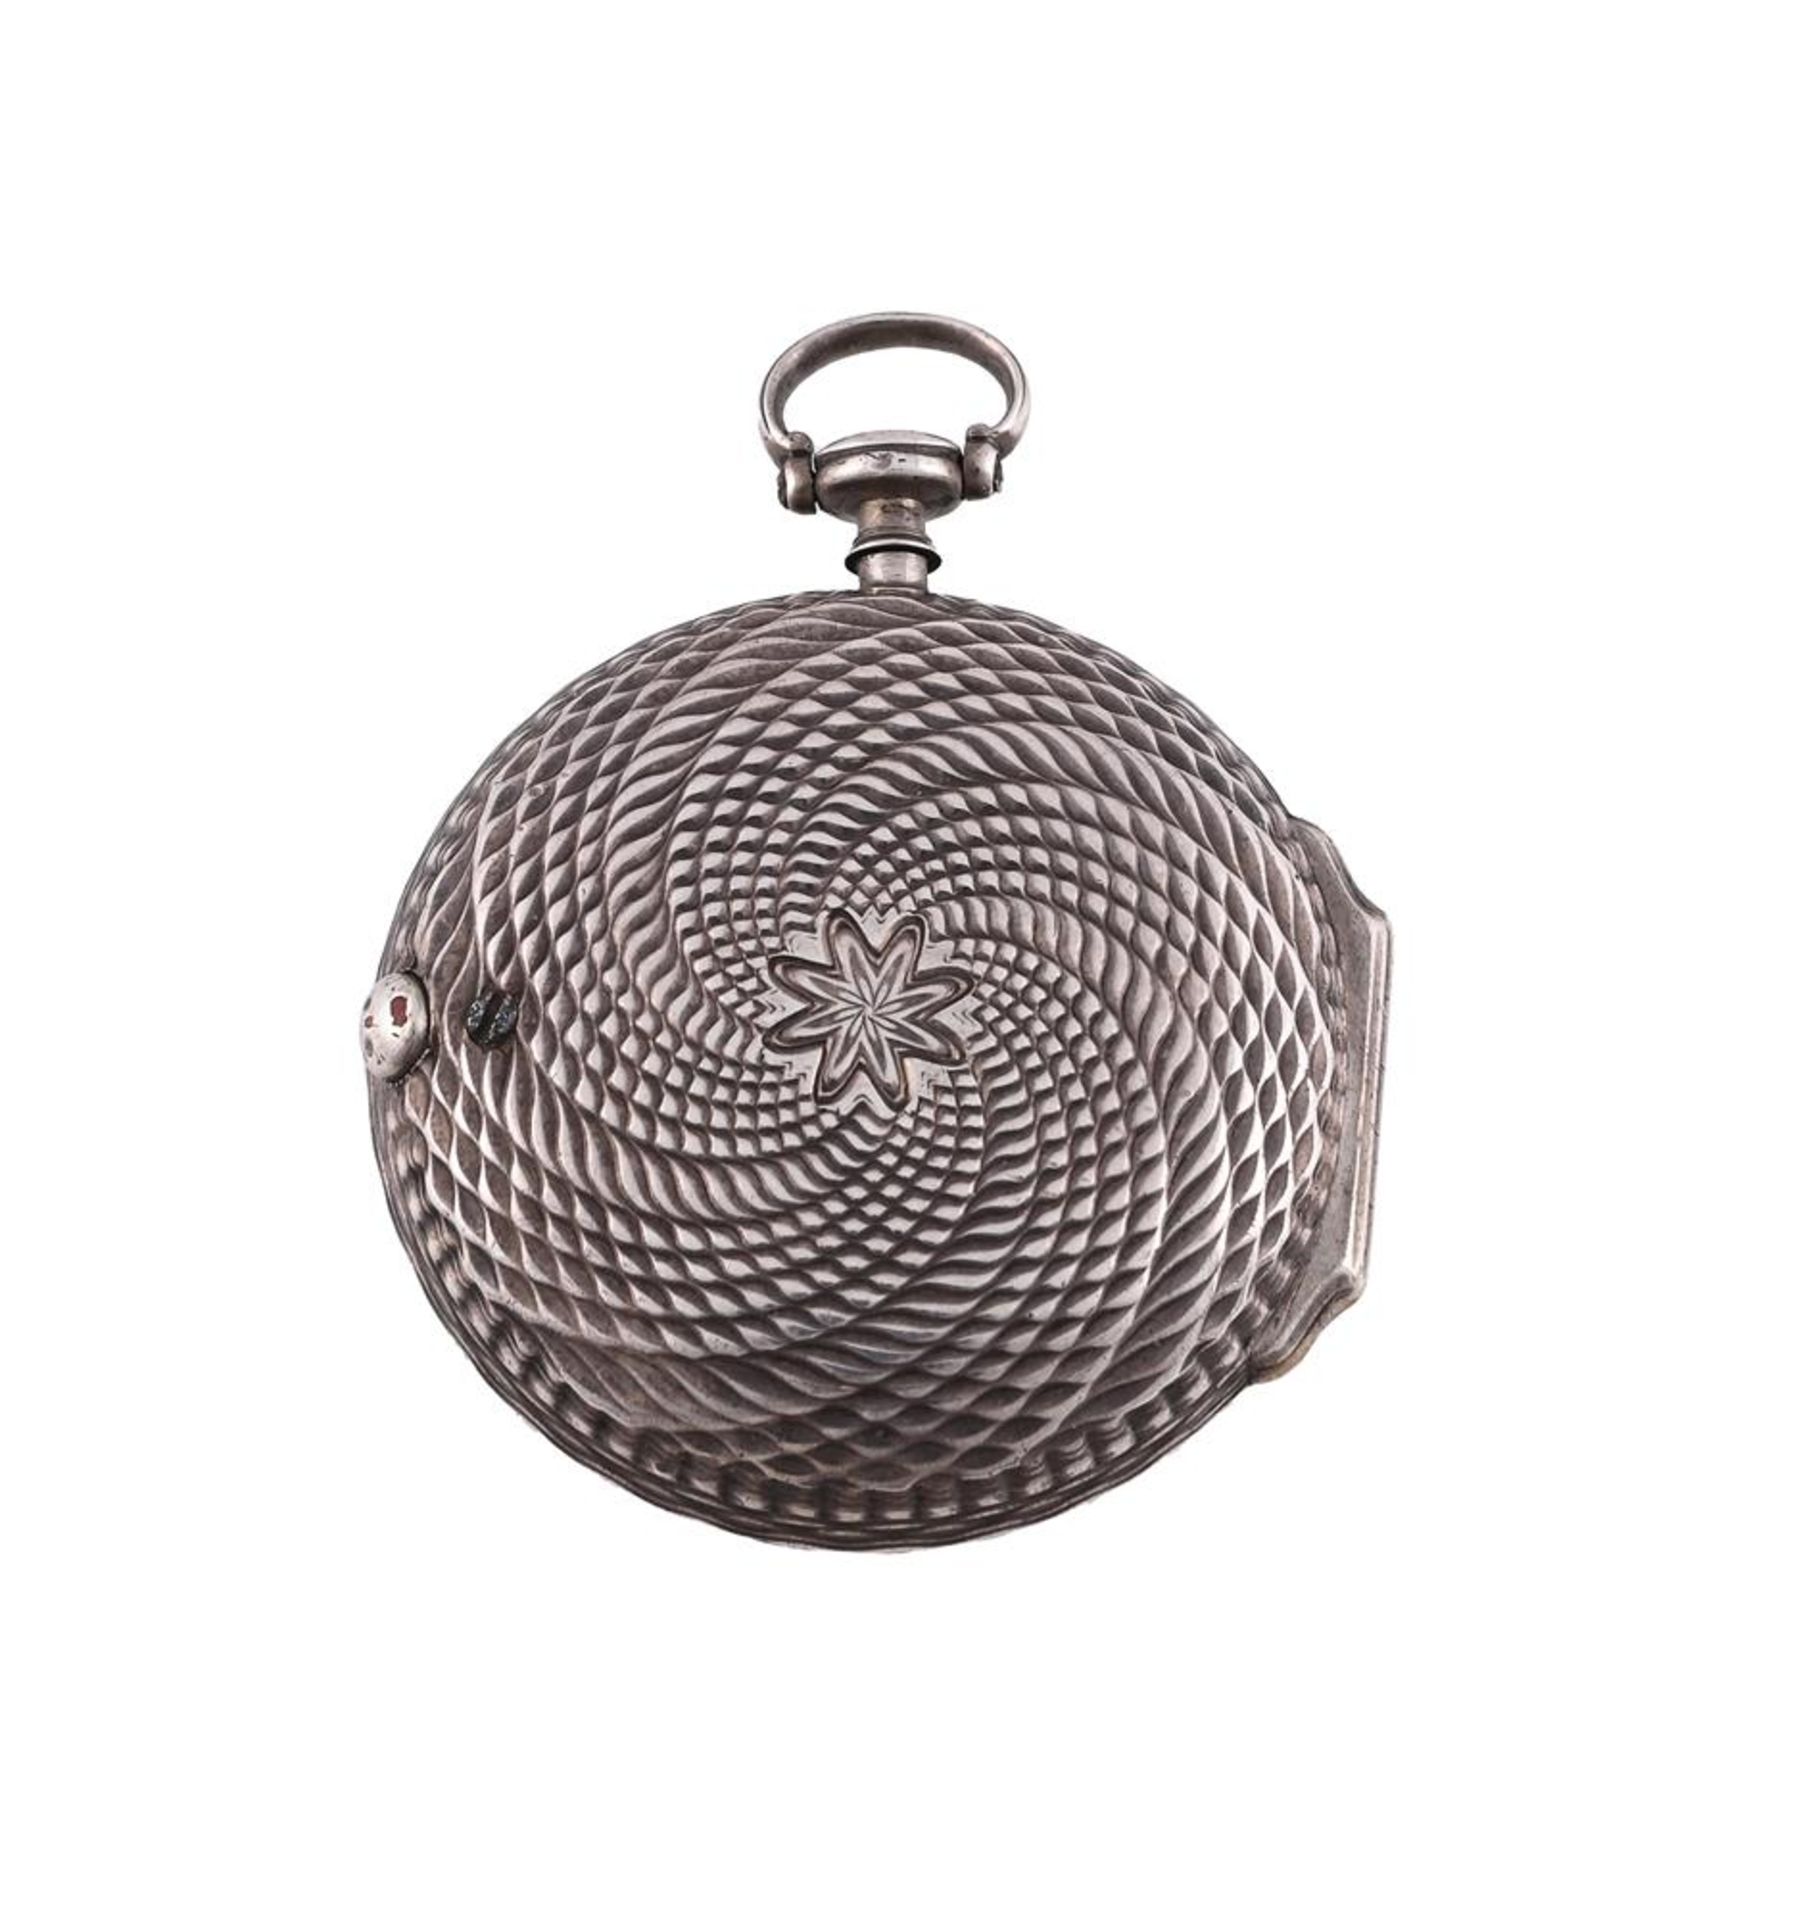 A GEORGE III SILVER CASED VERGE POCKET WATCH WITH ENGINE-TURNED DECORATION - Image 4 of 6